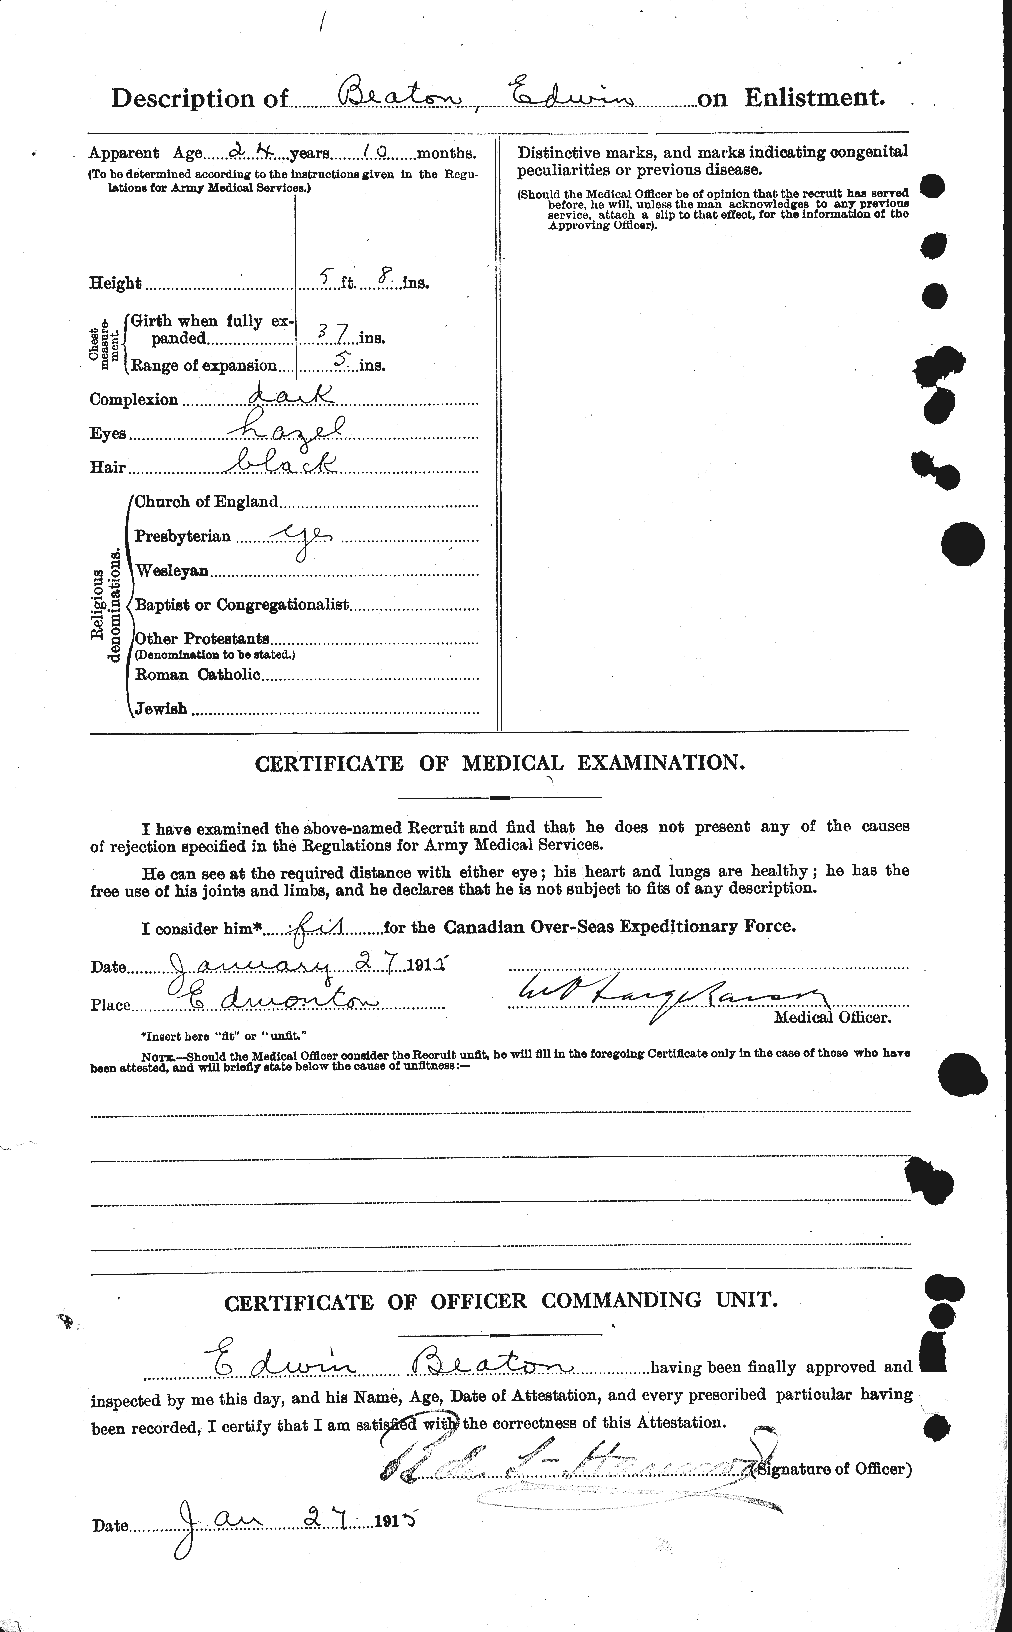 Personnel Records of the First World War - CEF 230496b